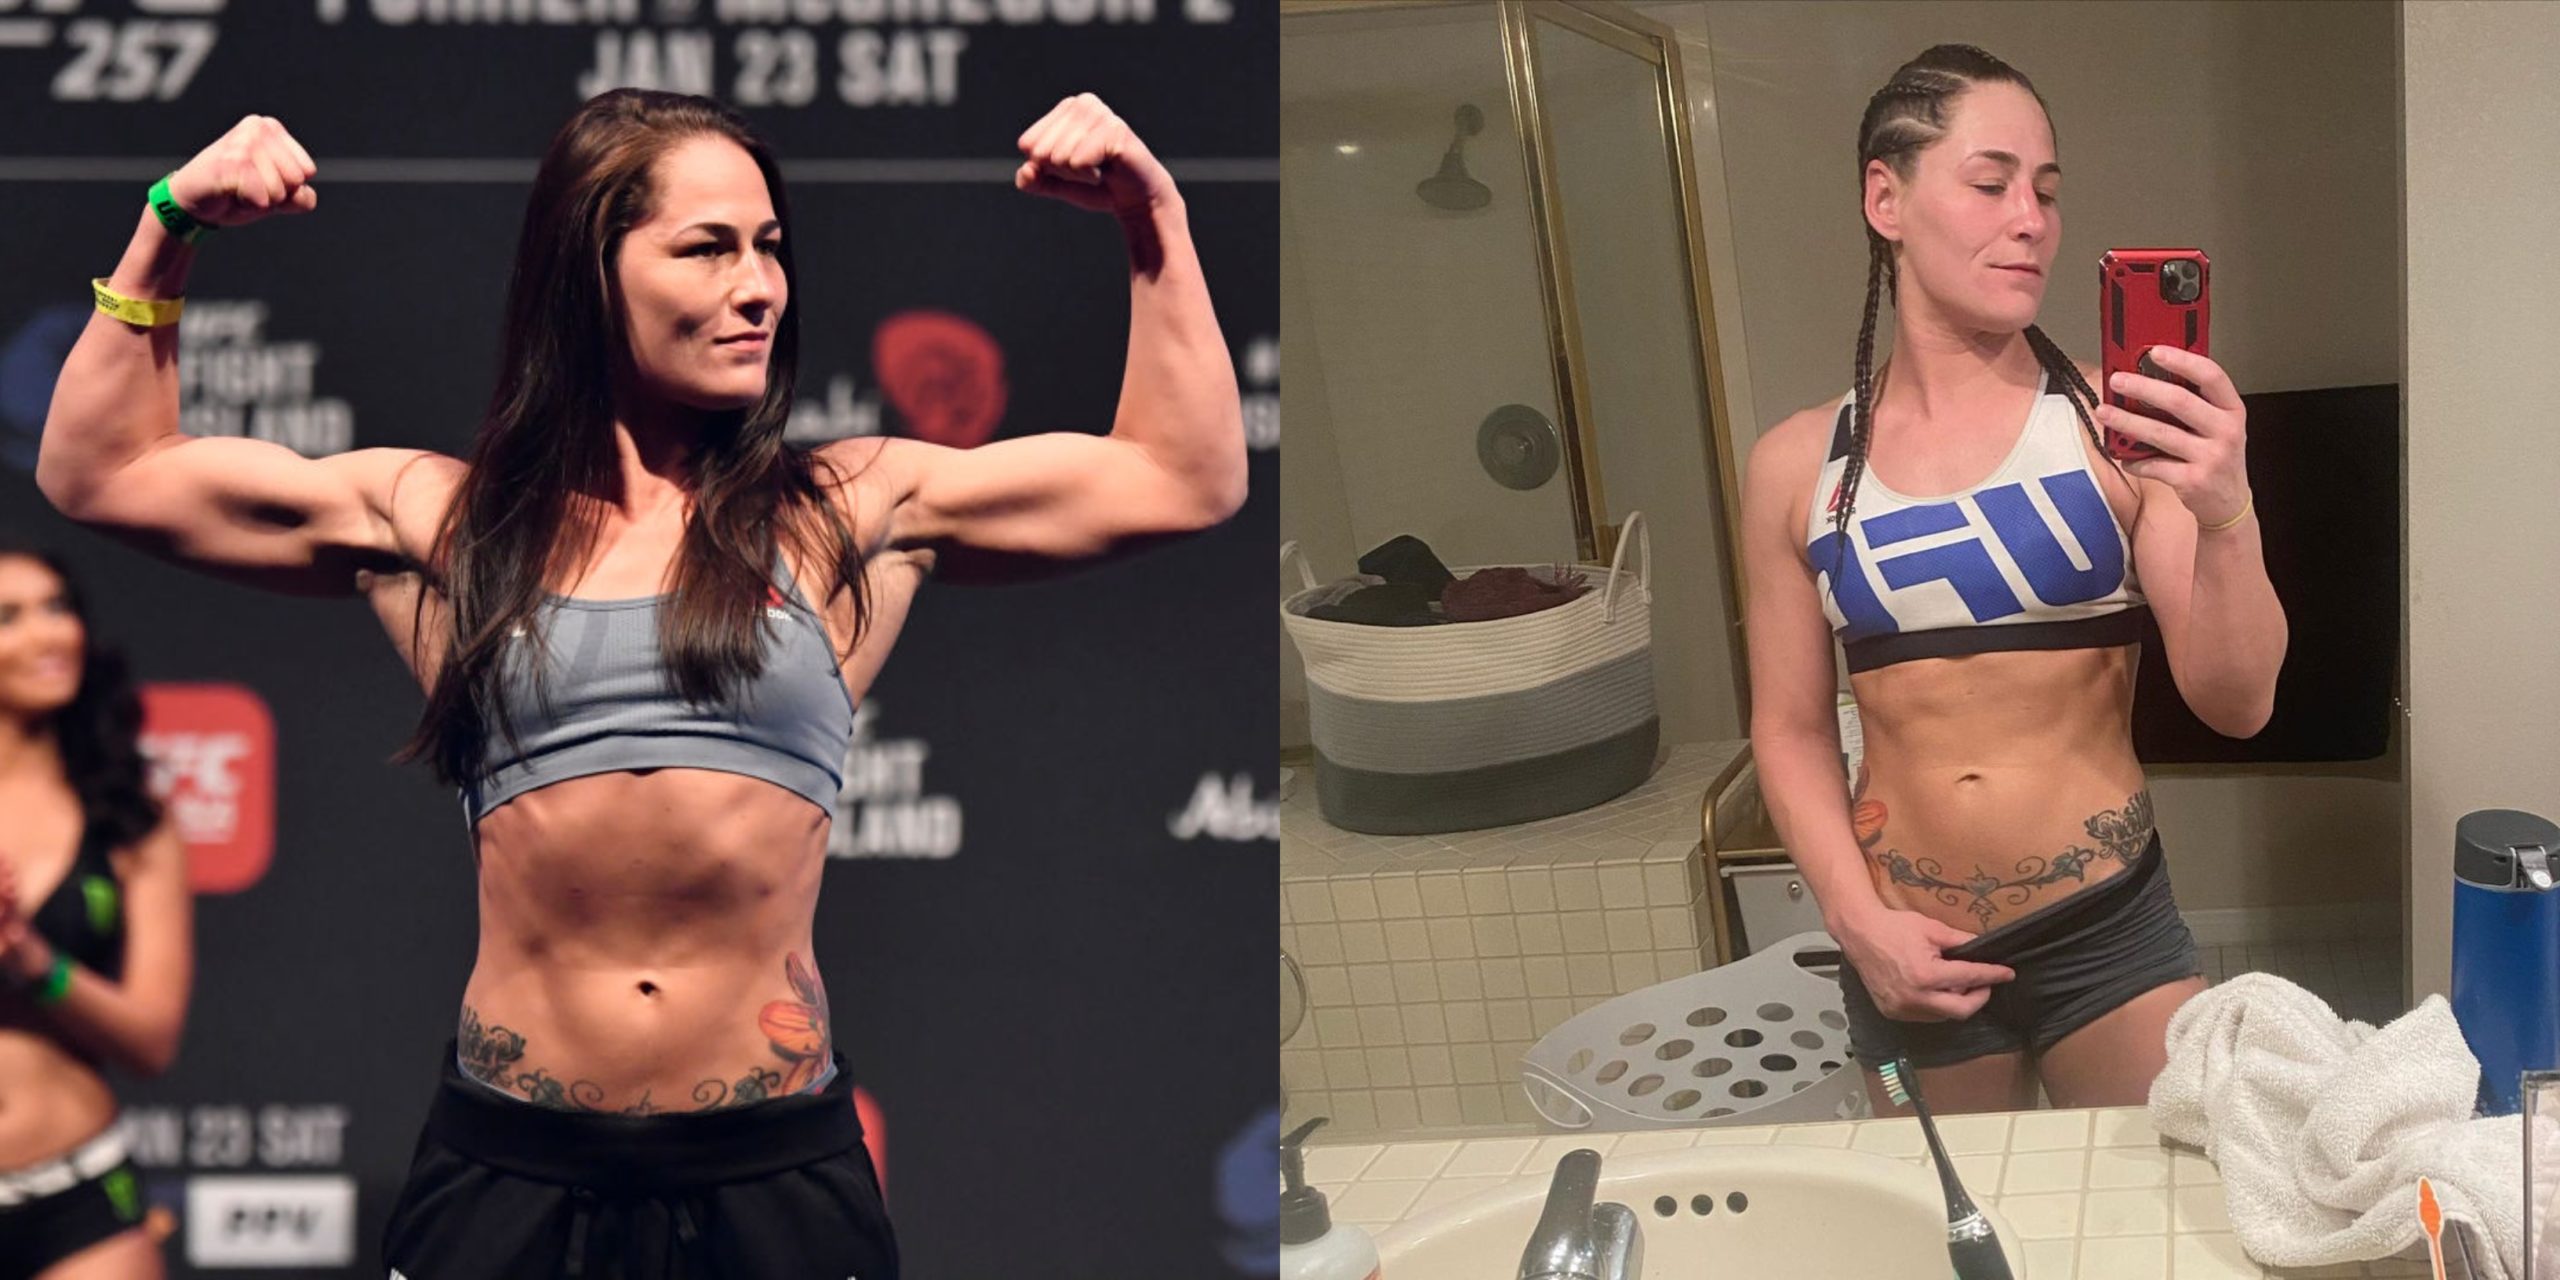 Read â€œUFC Flyweight Jessica Eye Announces Her Move To Join Onlyfans (PICS)